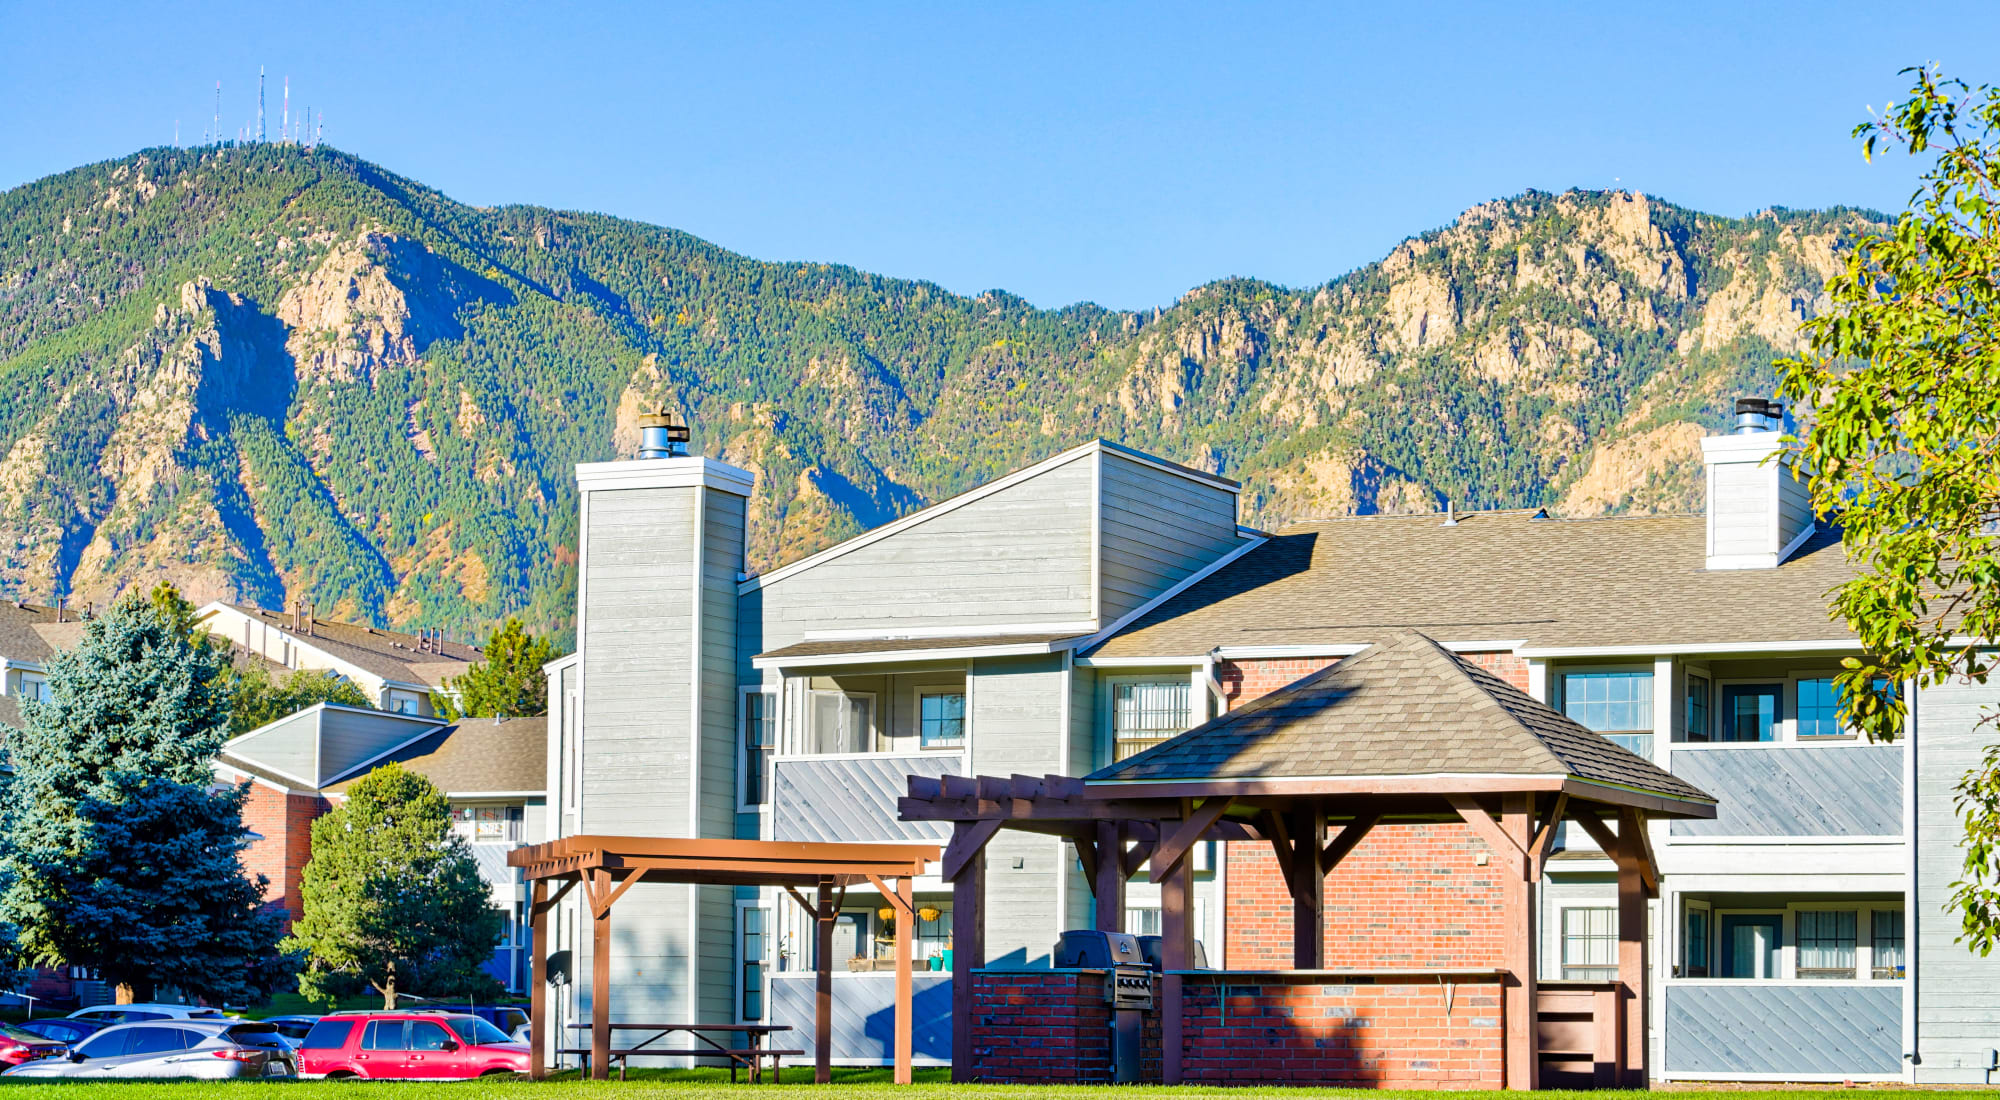 Mountain View Apartment Homes   Apartments in Colorado Springs, CO